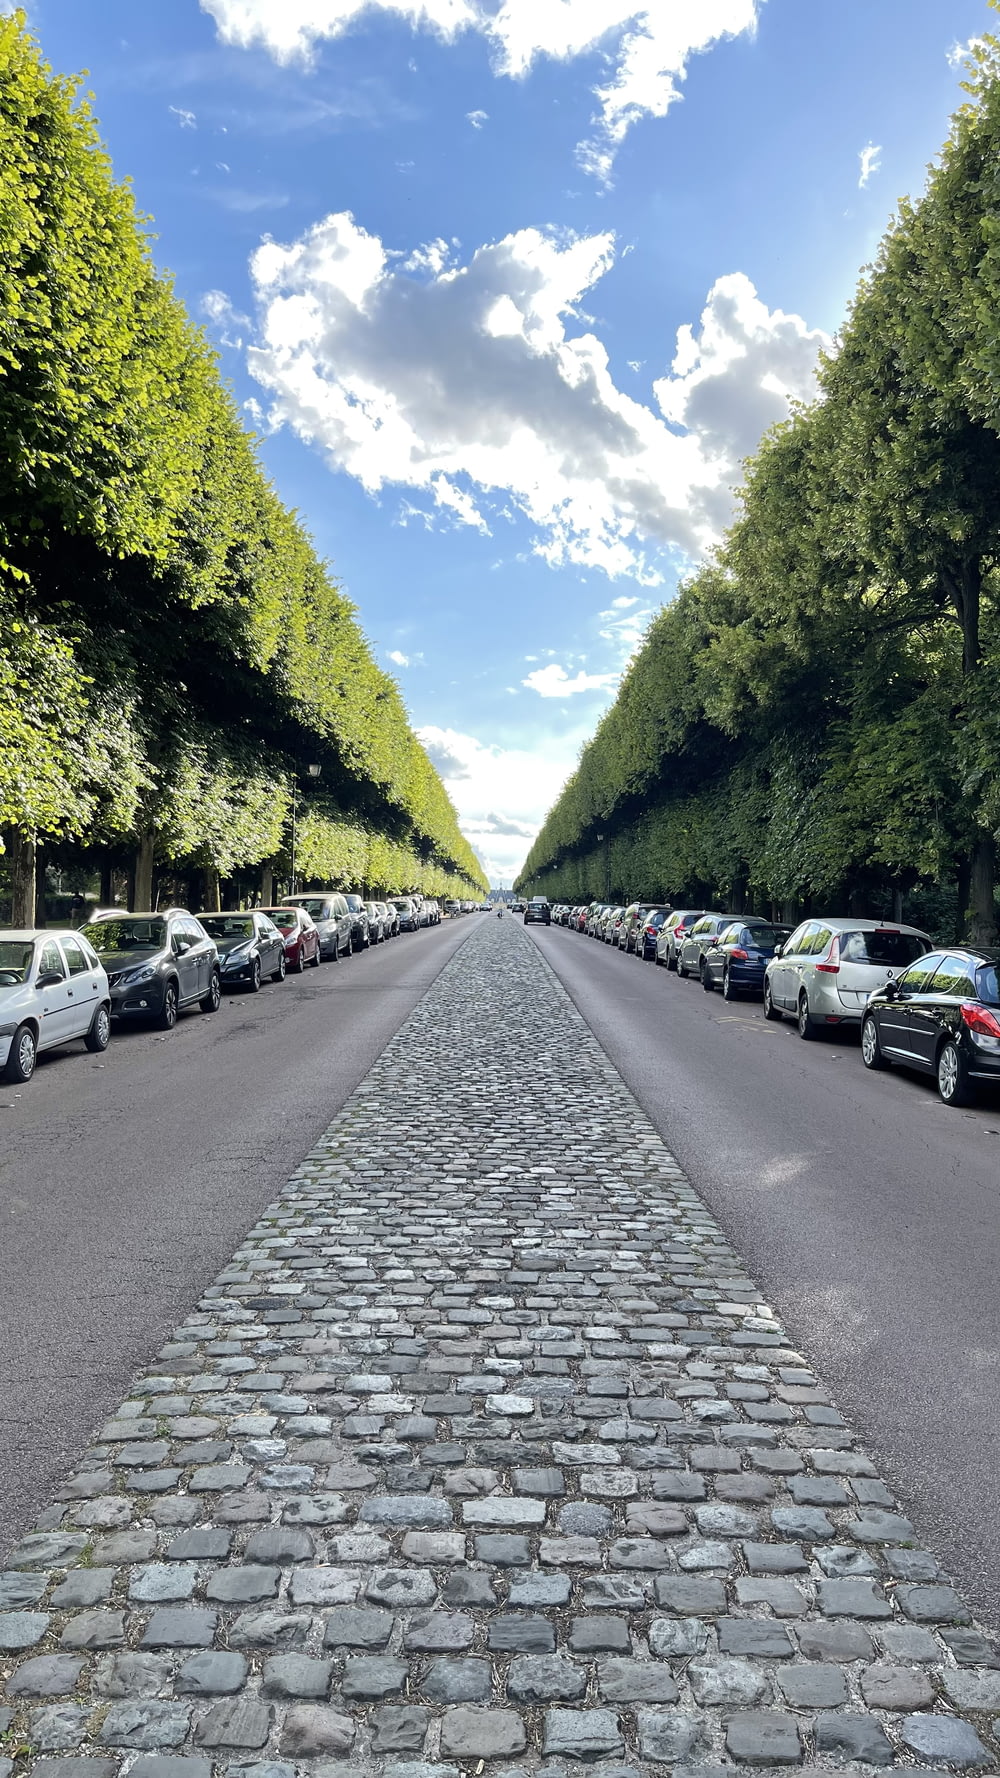 a cobblestone street lined with trees and parked cars